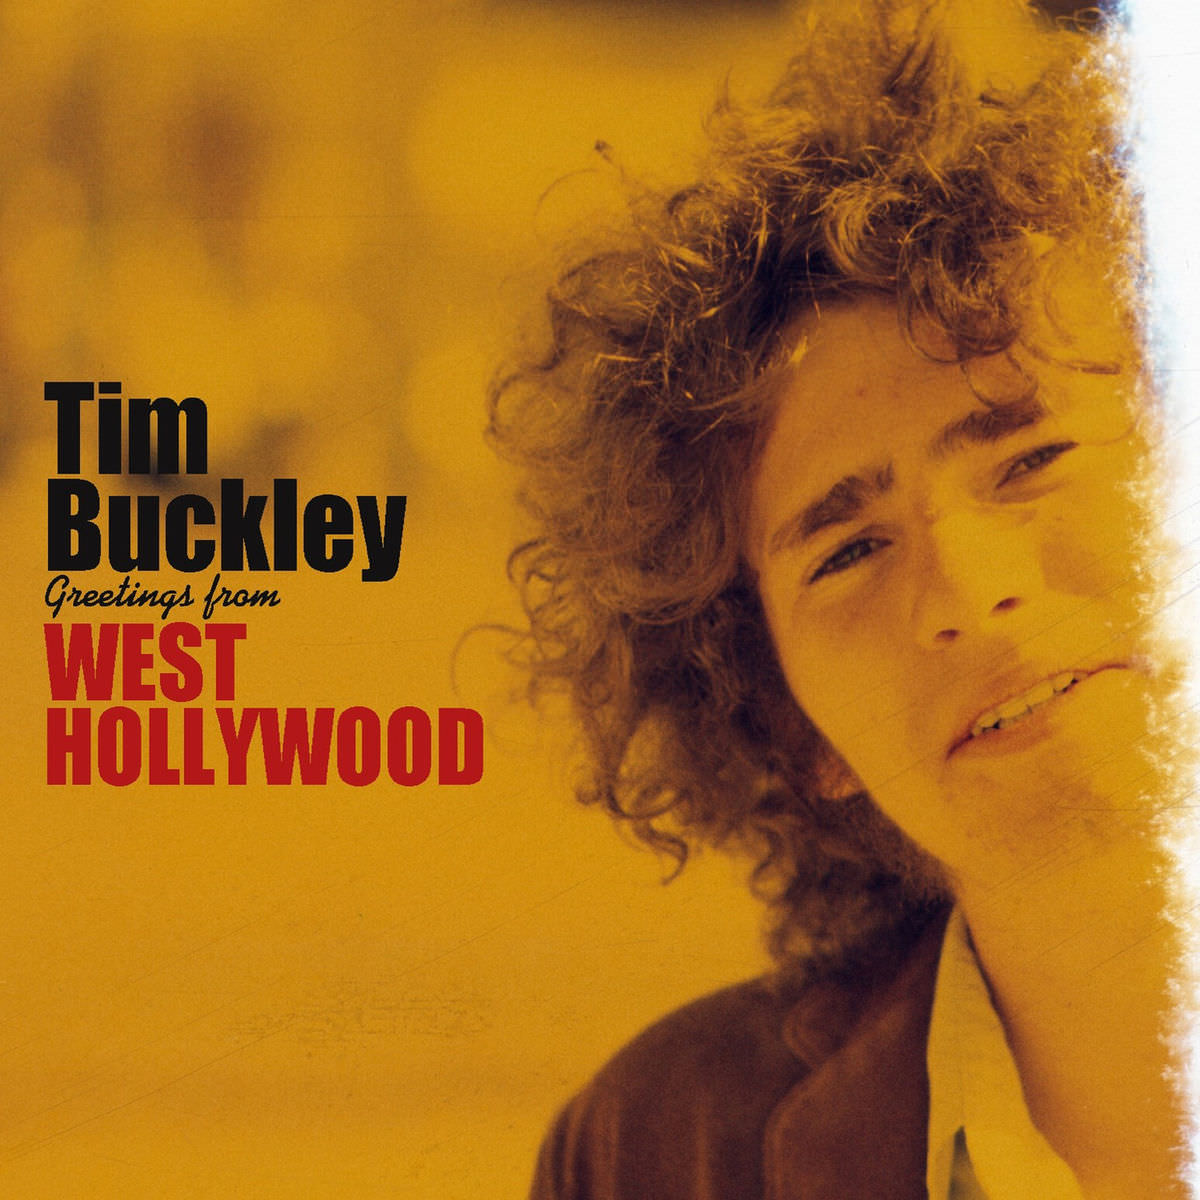 Tim Buckley - Greetings from West Hollywood (Remastered) (2017) [Qobuz FLAC 24bit/96kHz]